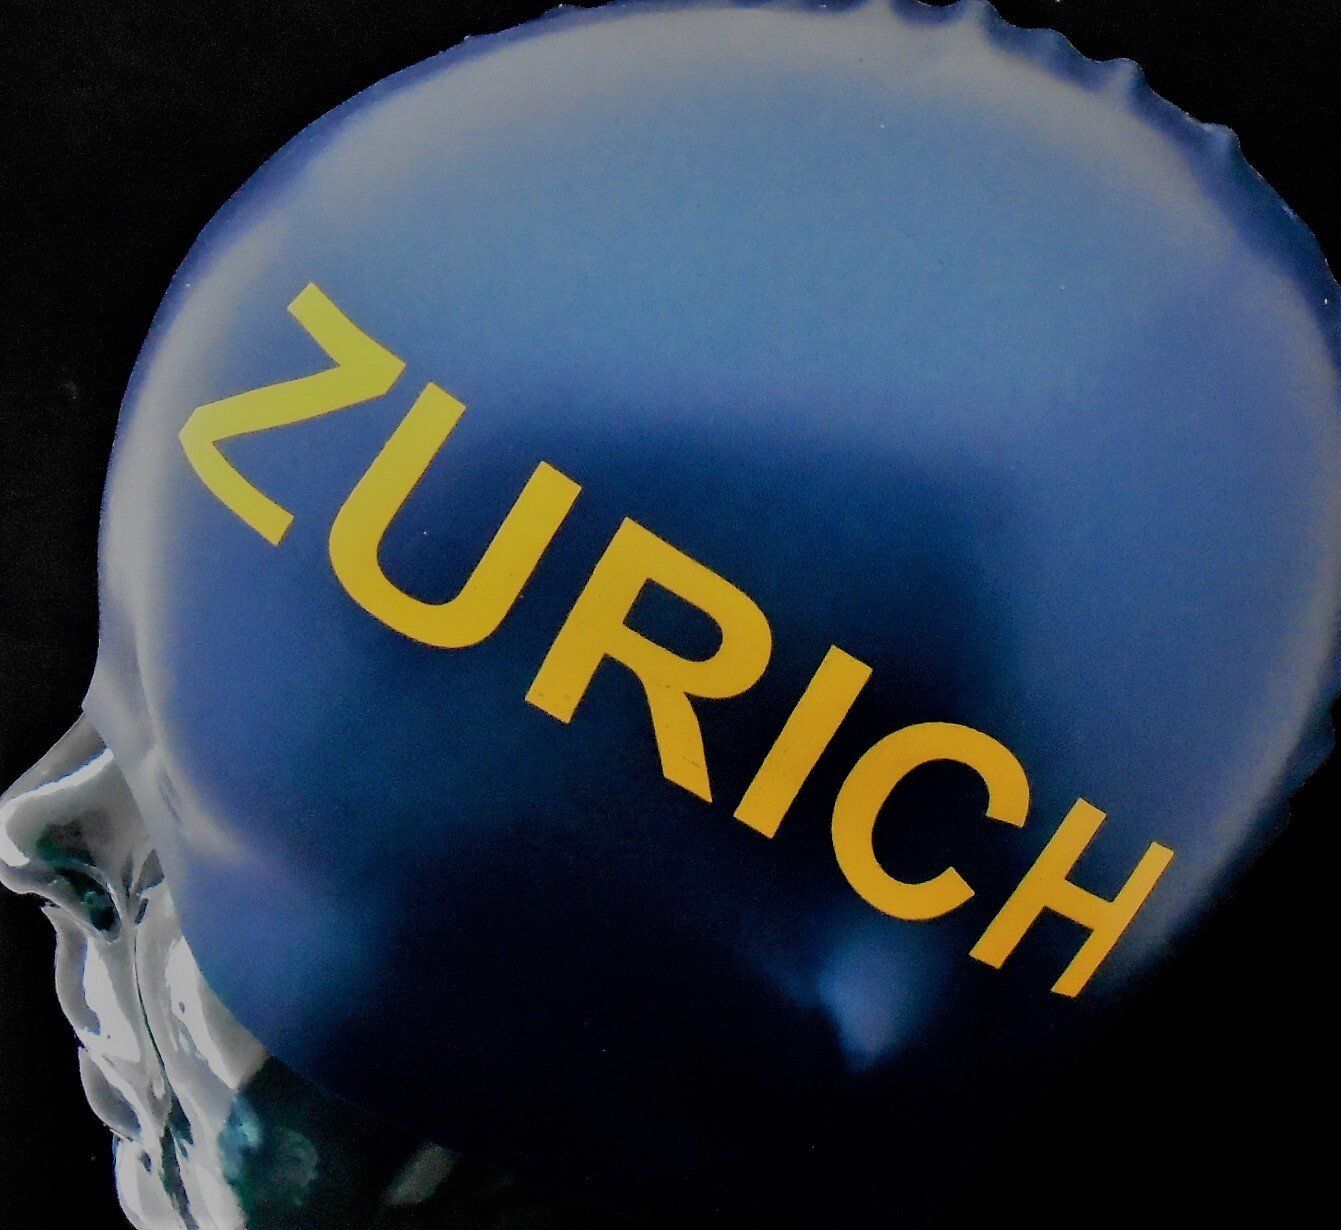 A blue bottle cap with the word zurich on it